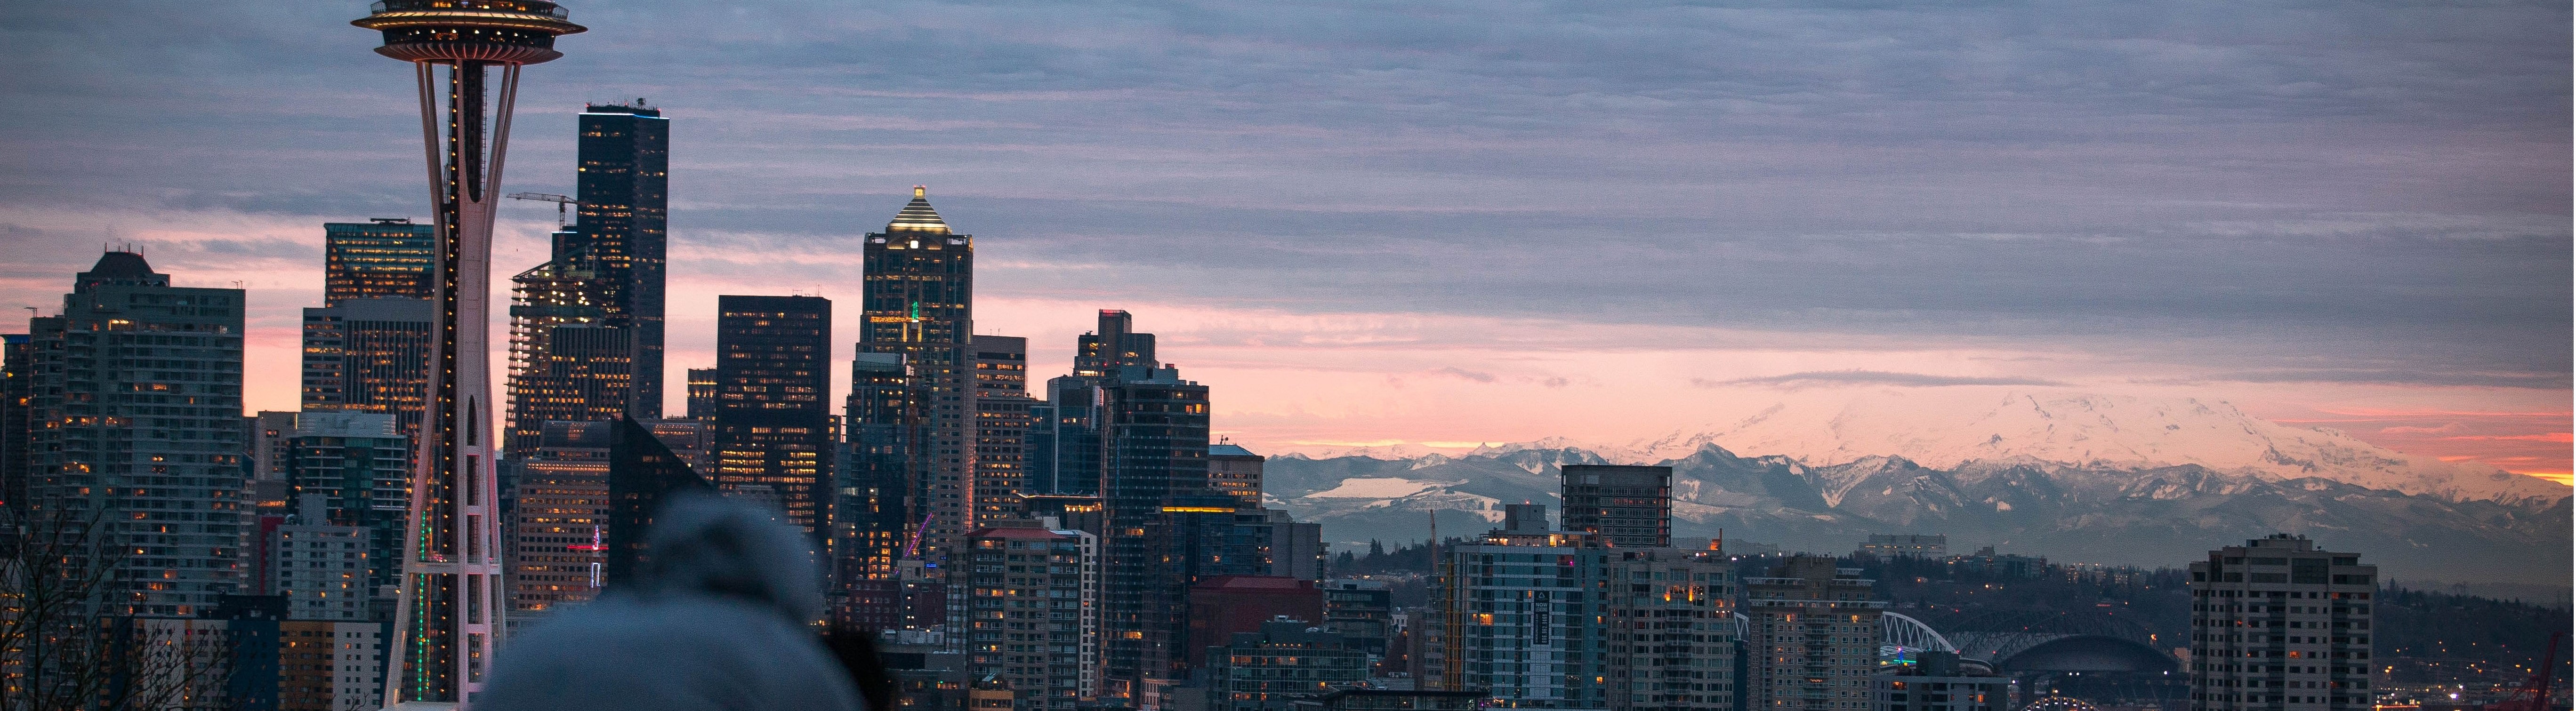 S9 Digital About Us Header Seattle